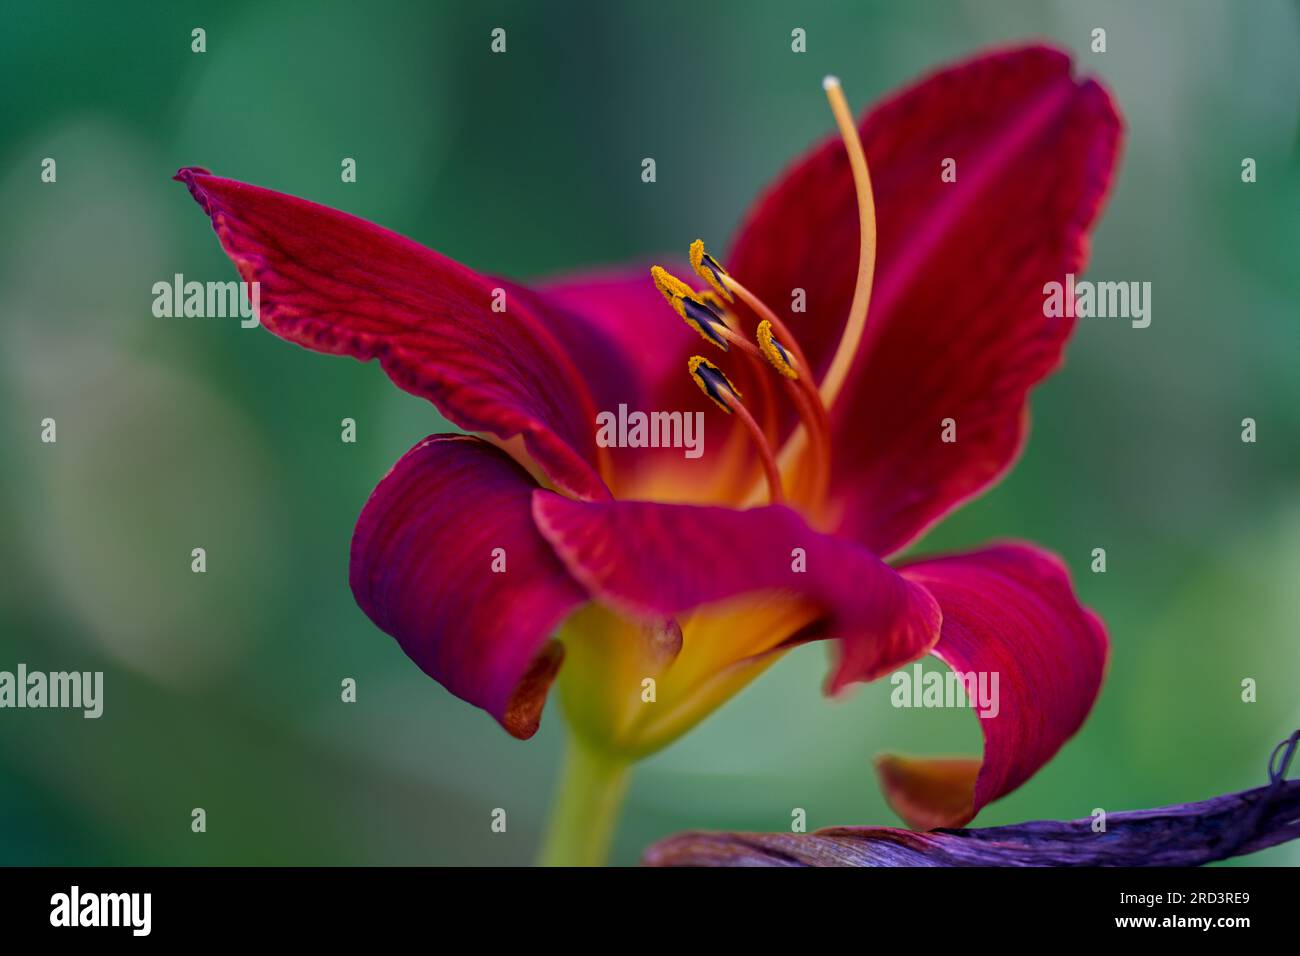 Lush,colorful vivid day lily flower close up Stock Photo